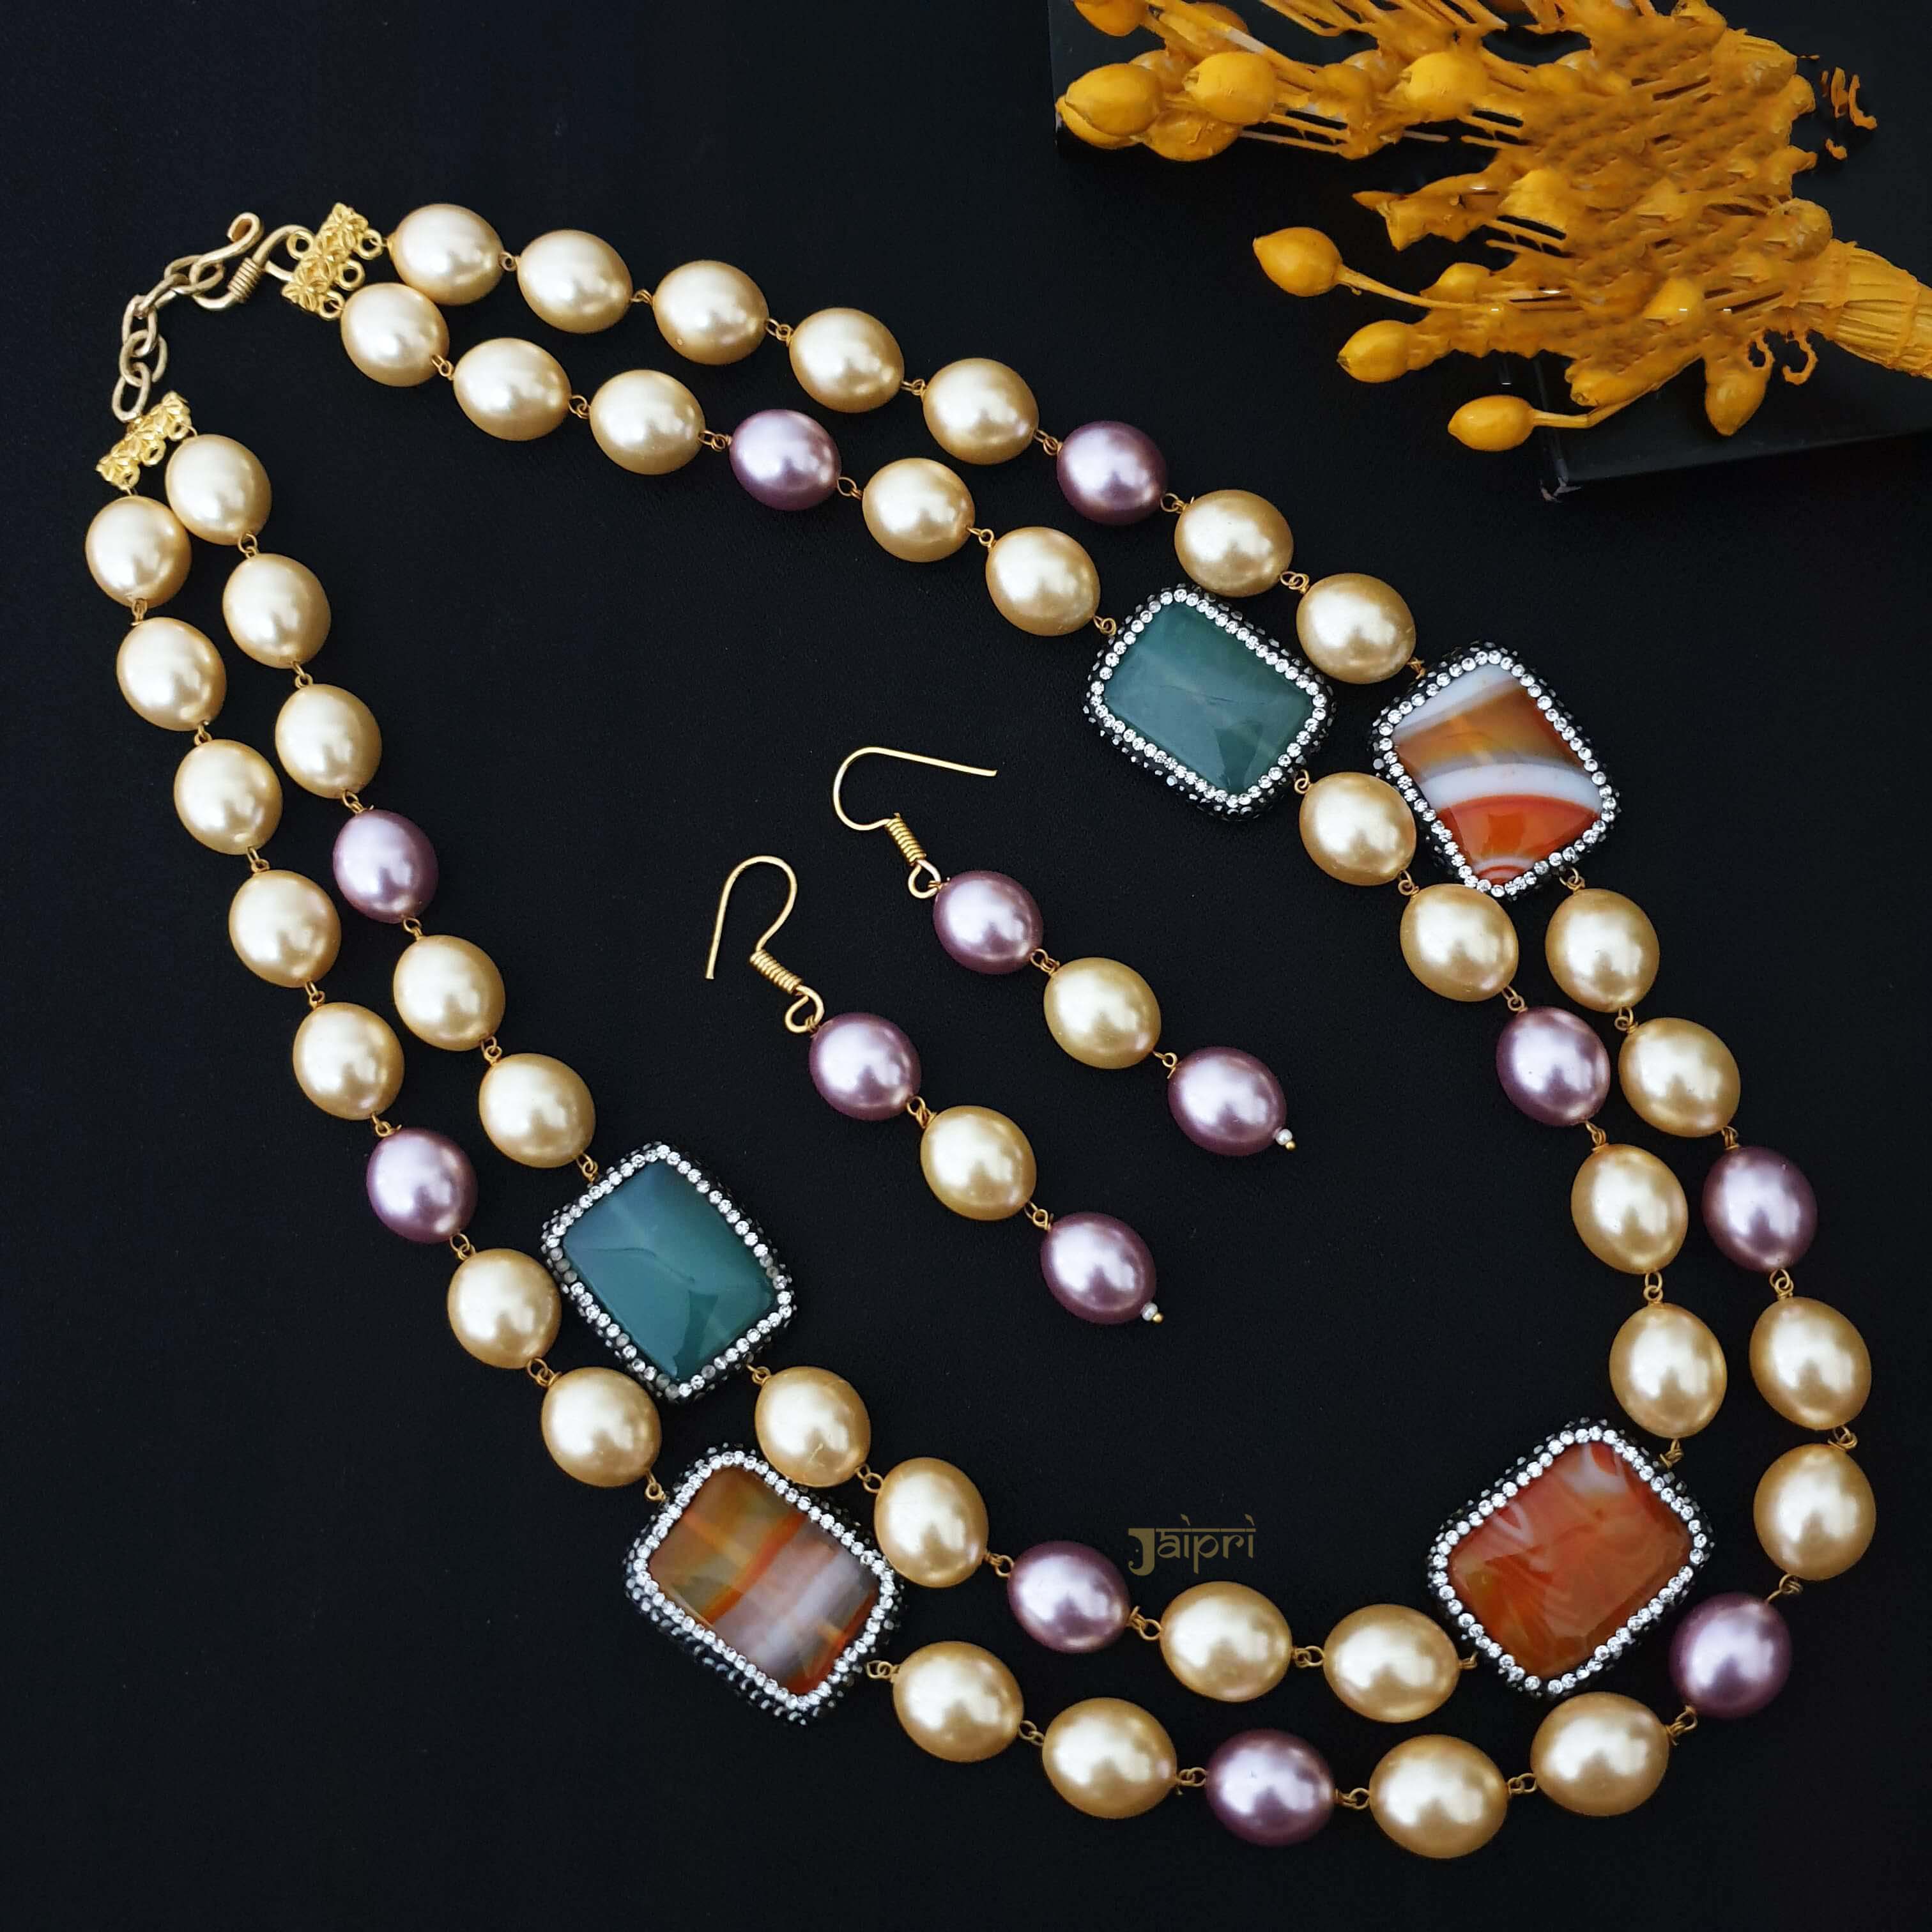 Two Layered Premium Pearl Stone Beads Necklace With Earrings